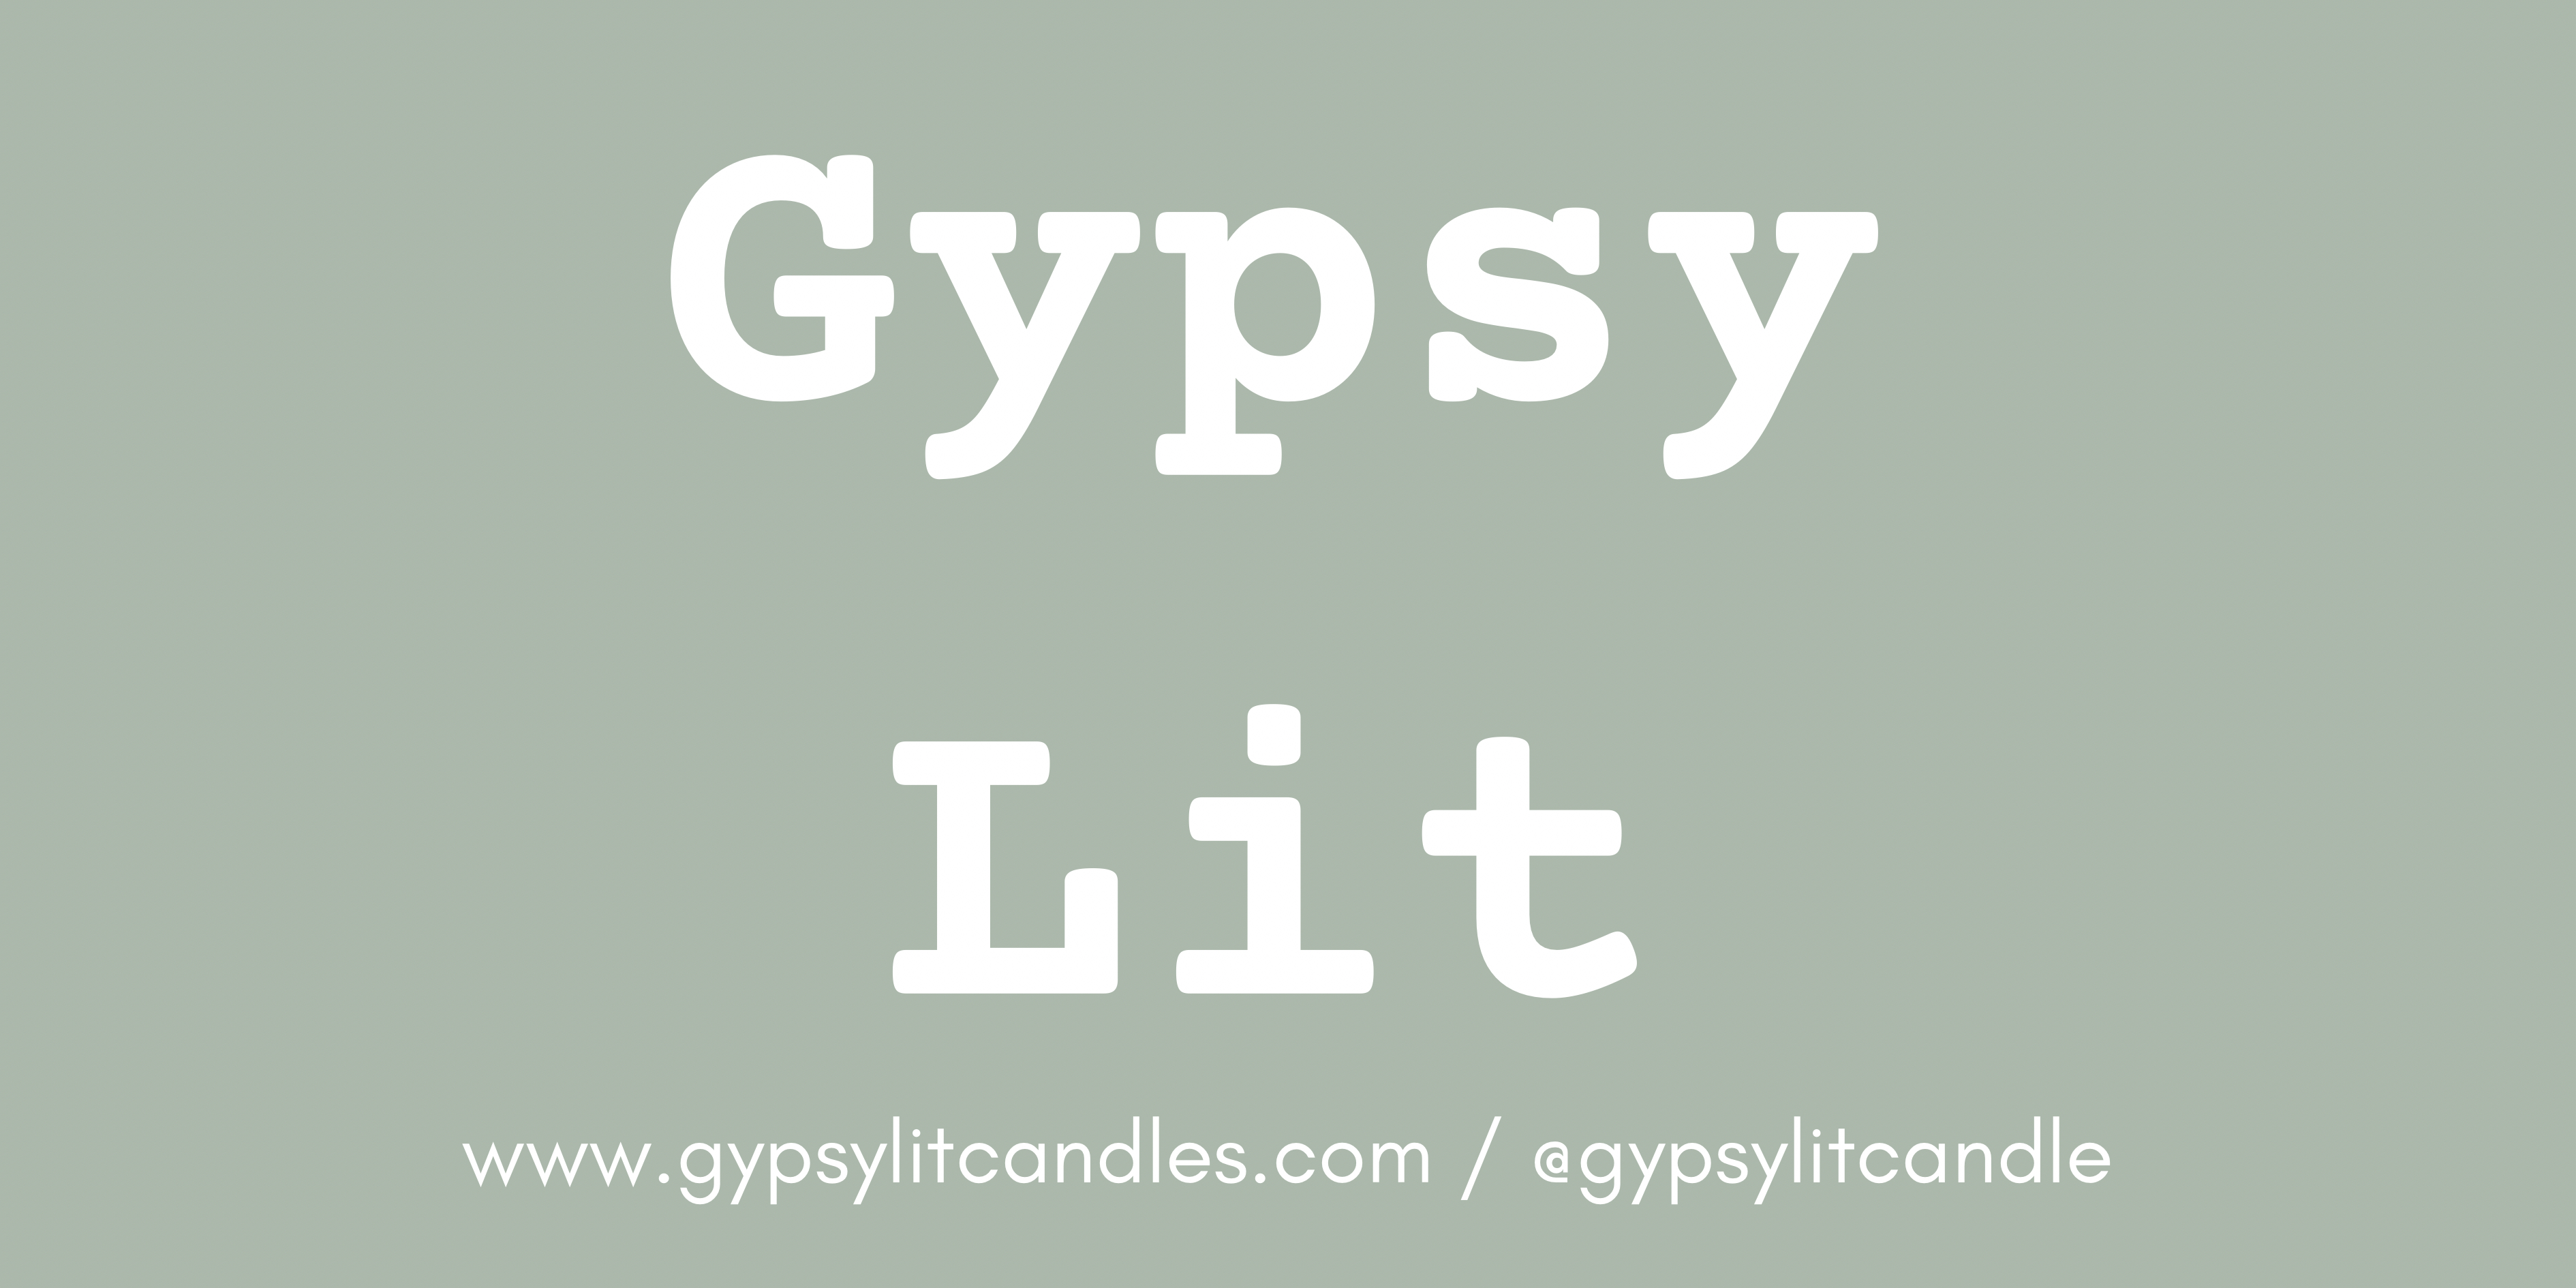 Gypsy Lit Candles business logo 